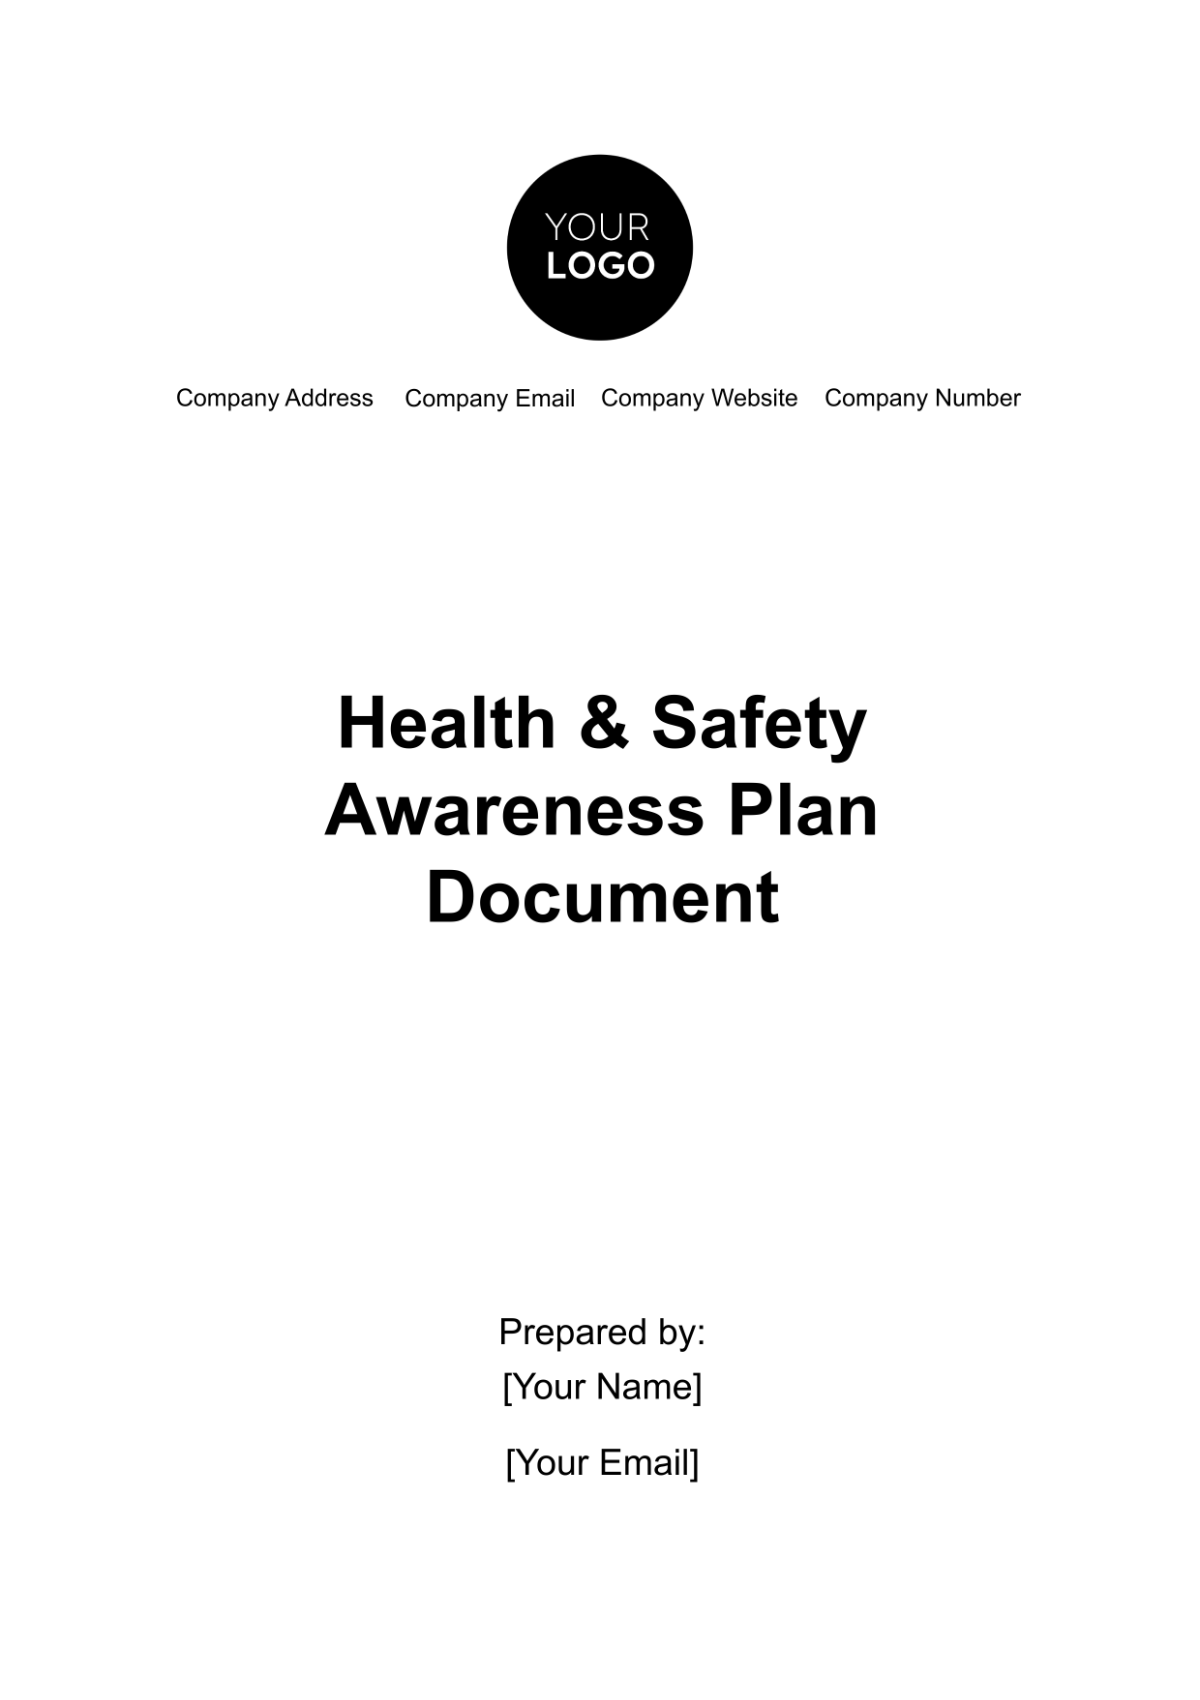 Free Health & Safety Awareness Plan Document Template